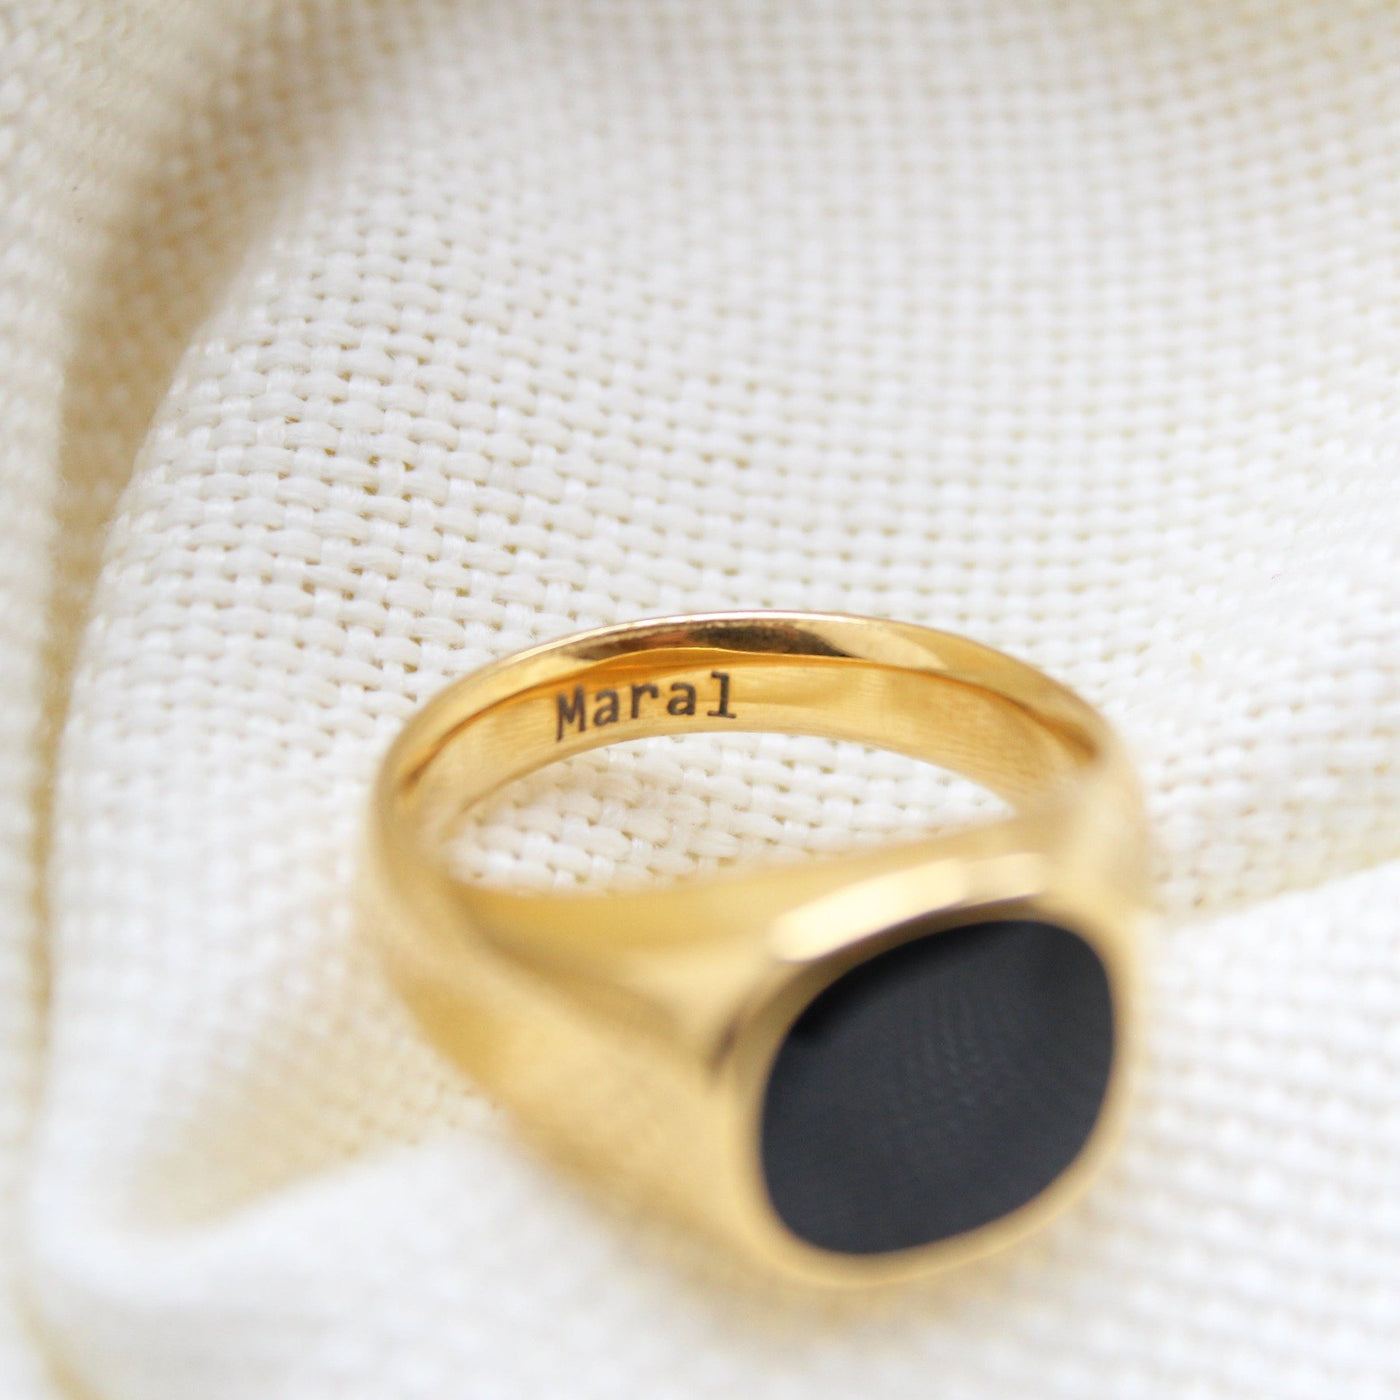 Classy Onyx Signet Ring in Gold - Maral Kunst Jewelry